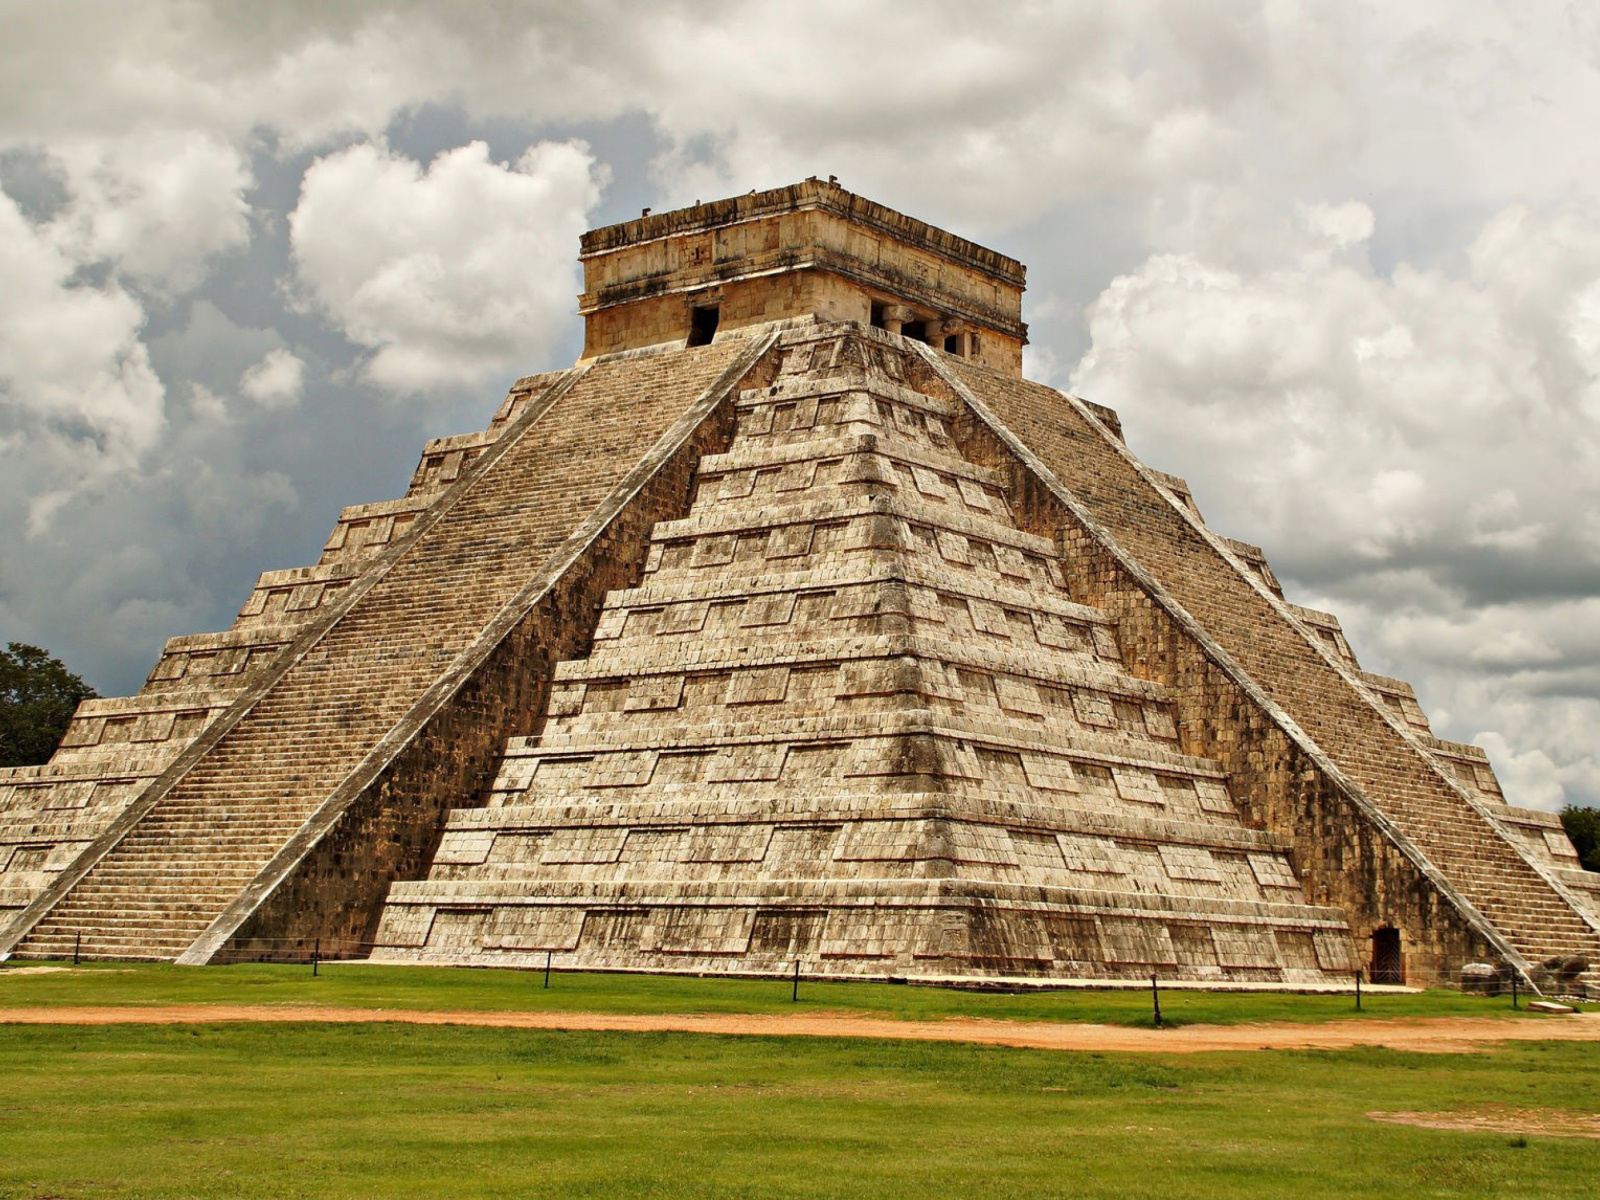 One of the 7 Wonders of the World Chichen Itza Pyramid wallpaper 1600x1200